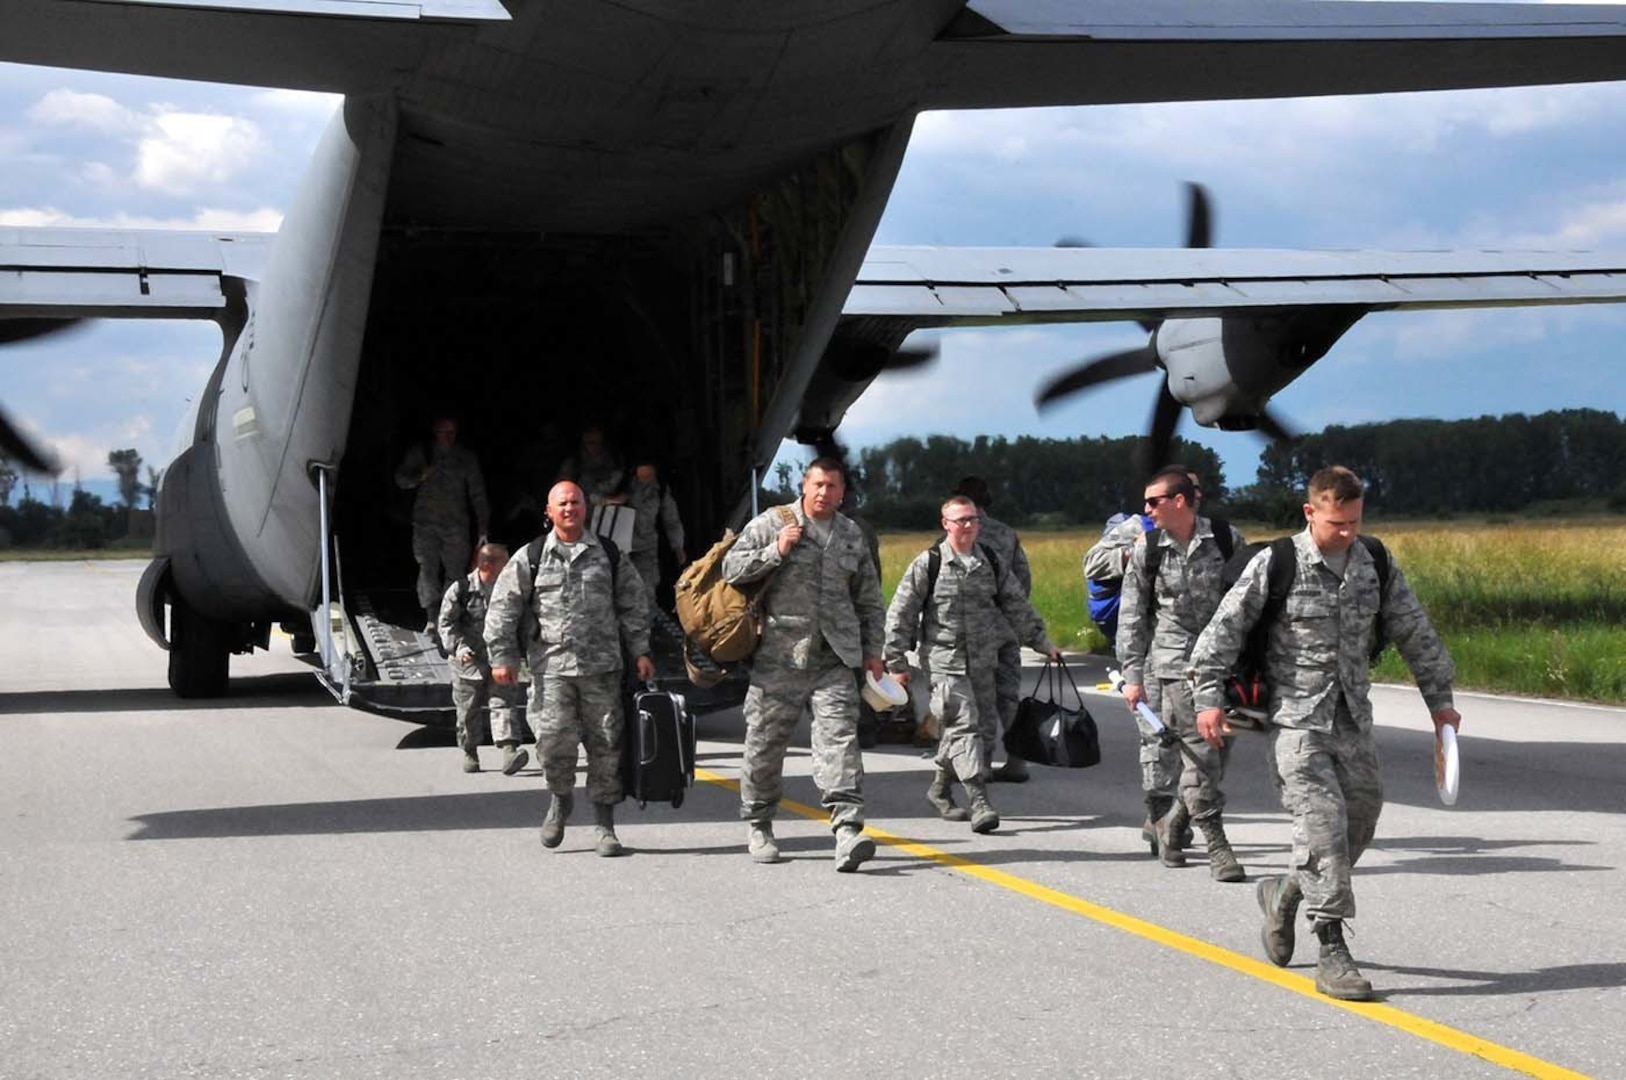 U.S. Air Force and Massachusetts Air National Guard members stationed at Amari Air Base, Estonia,are reunited with their 104th Fighter Wing members stationed to Graf Ignatievo Air Base, Bulgaria, May 27, 2016.  Wing members are part of a theater security package deployed to multiple European locations in support of Operation Atlantic Resolve.  